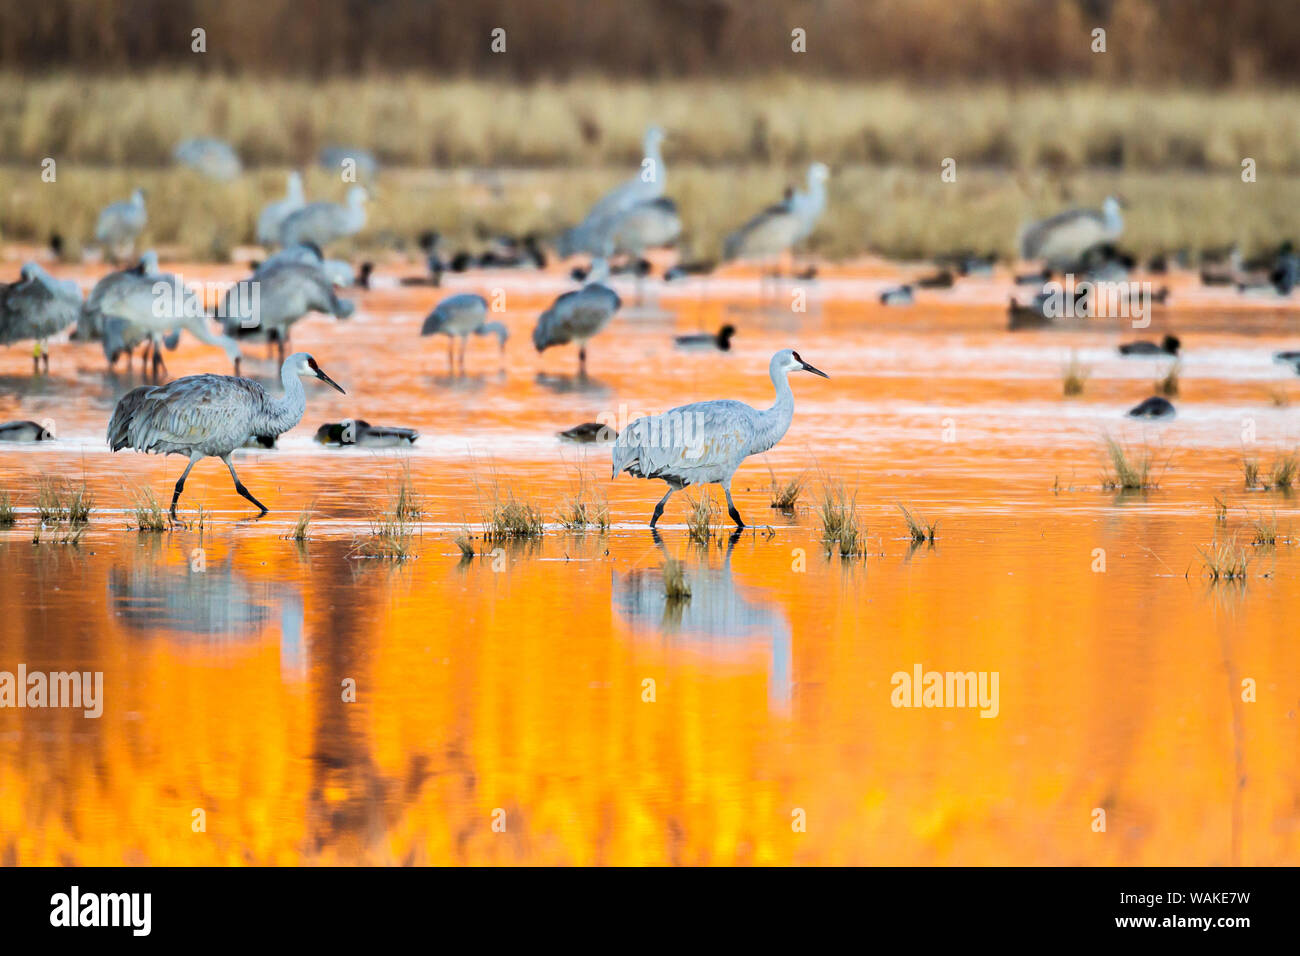 USA, New Mexico, Bosque del Apache National Wildlife Refuge. Sandhill cranes in water at sunrise. Credit as: Cathy & Gordon Illg / Jaynes Gallery / DanitaDelimont.com Stock Photo